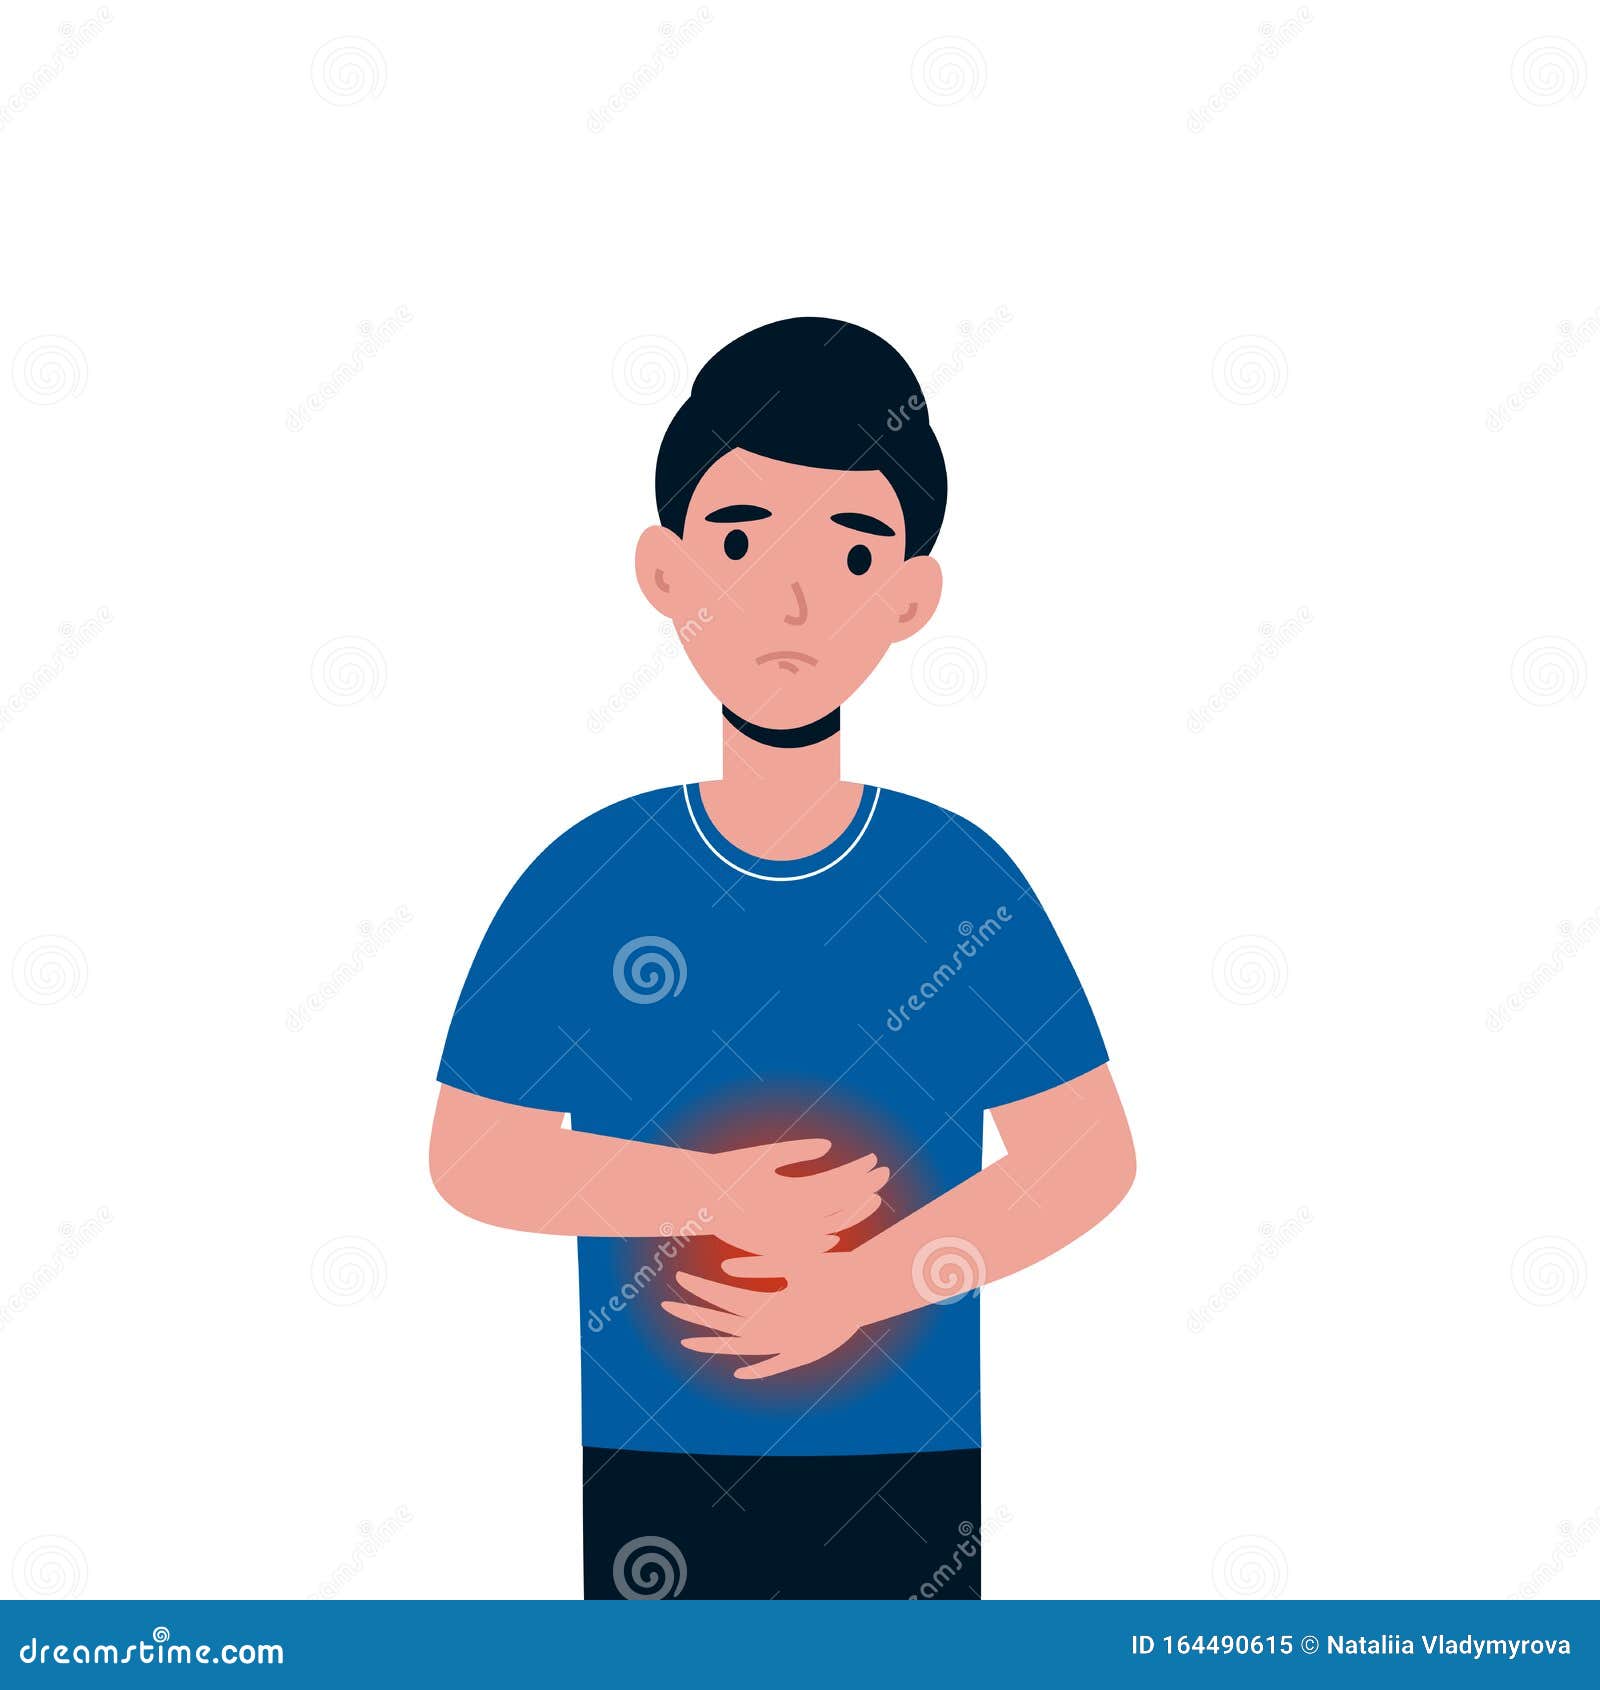 Man with stomach ache stock vector. Illustration of healthy - 164490615